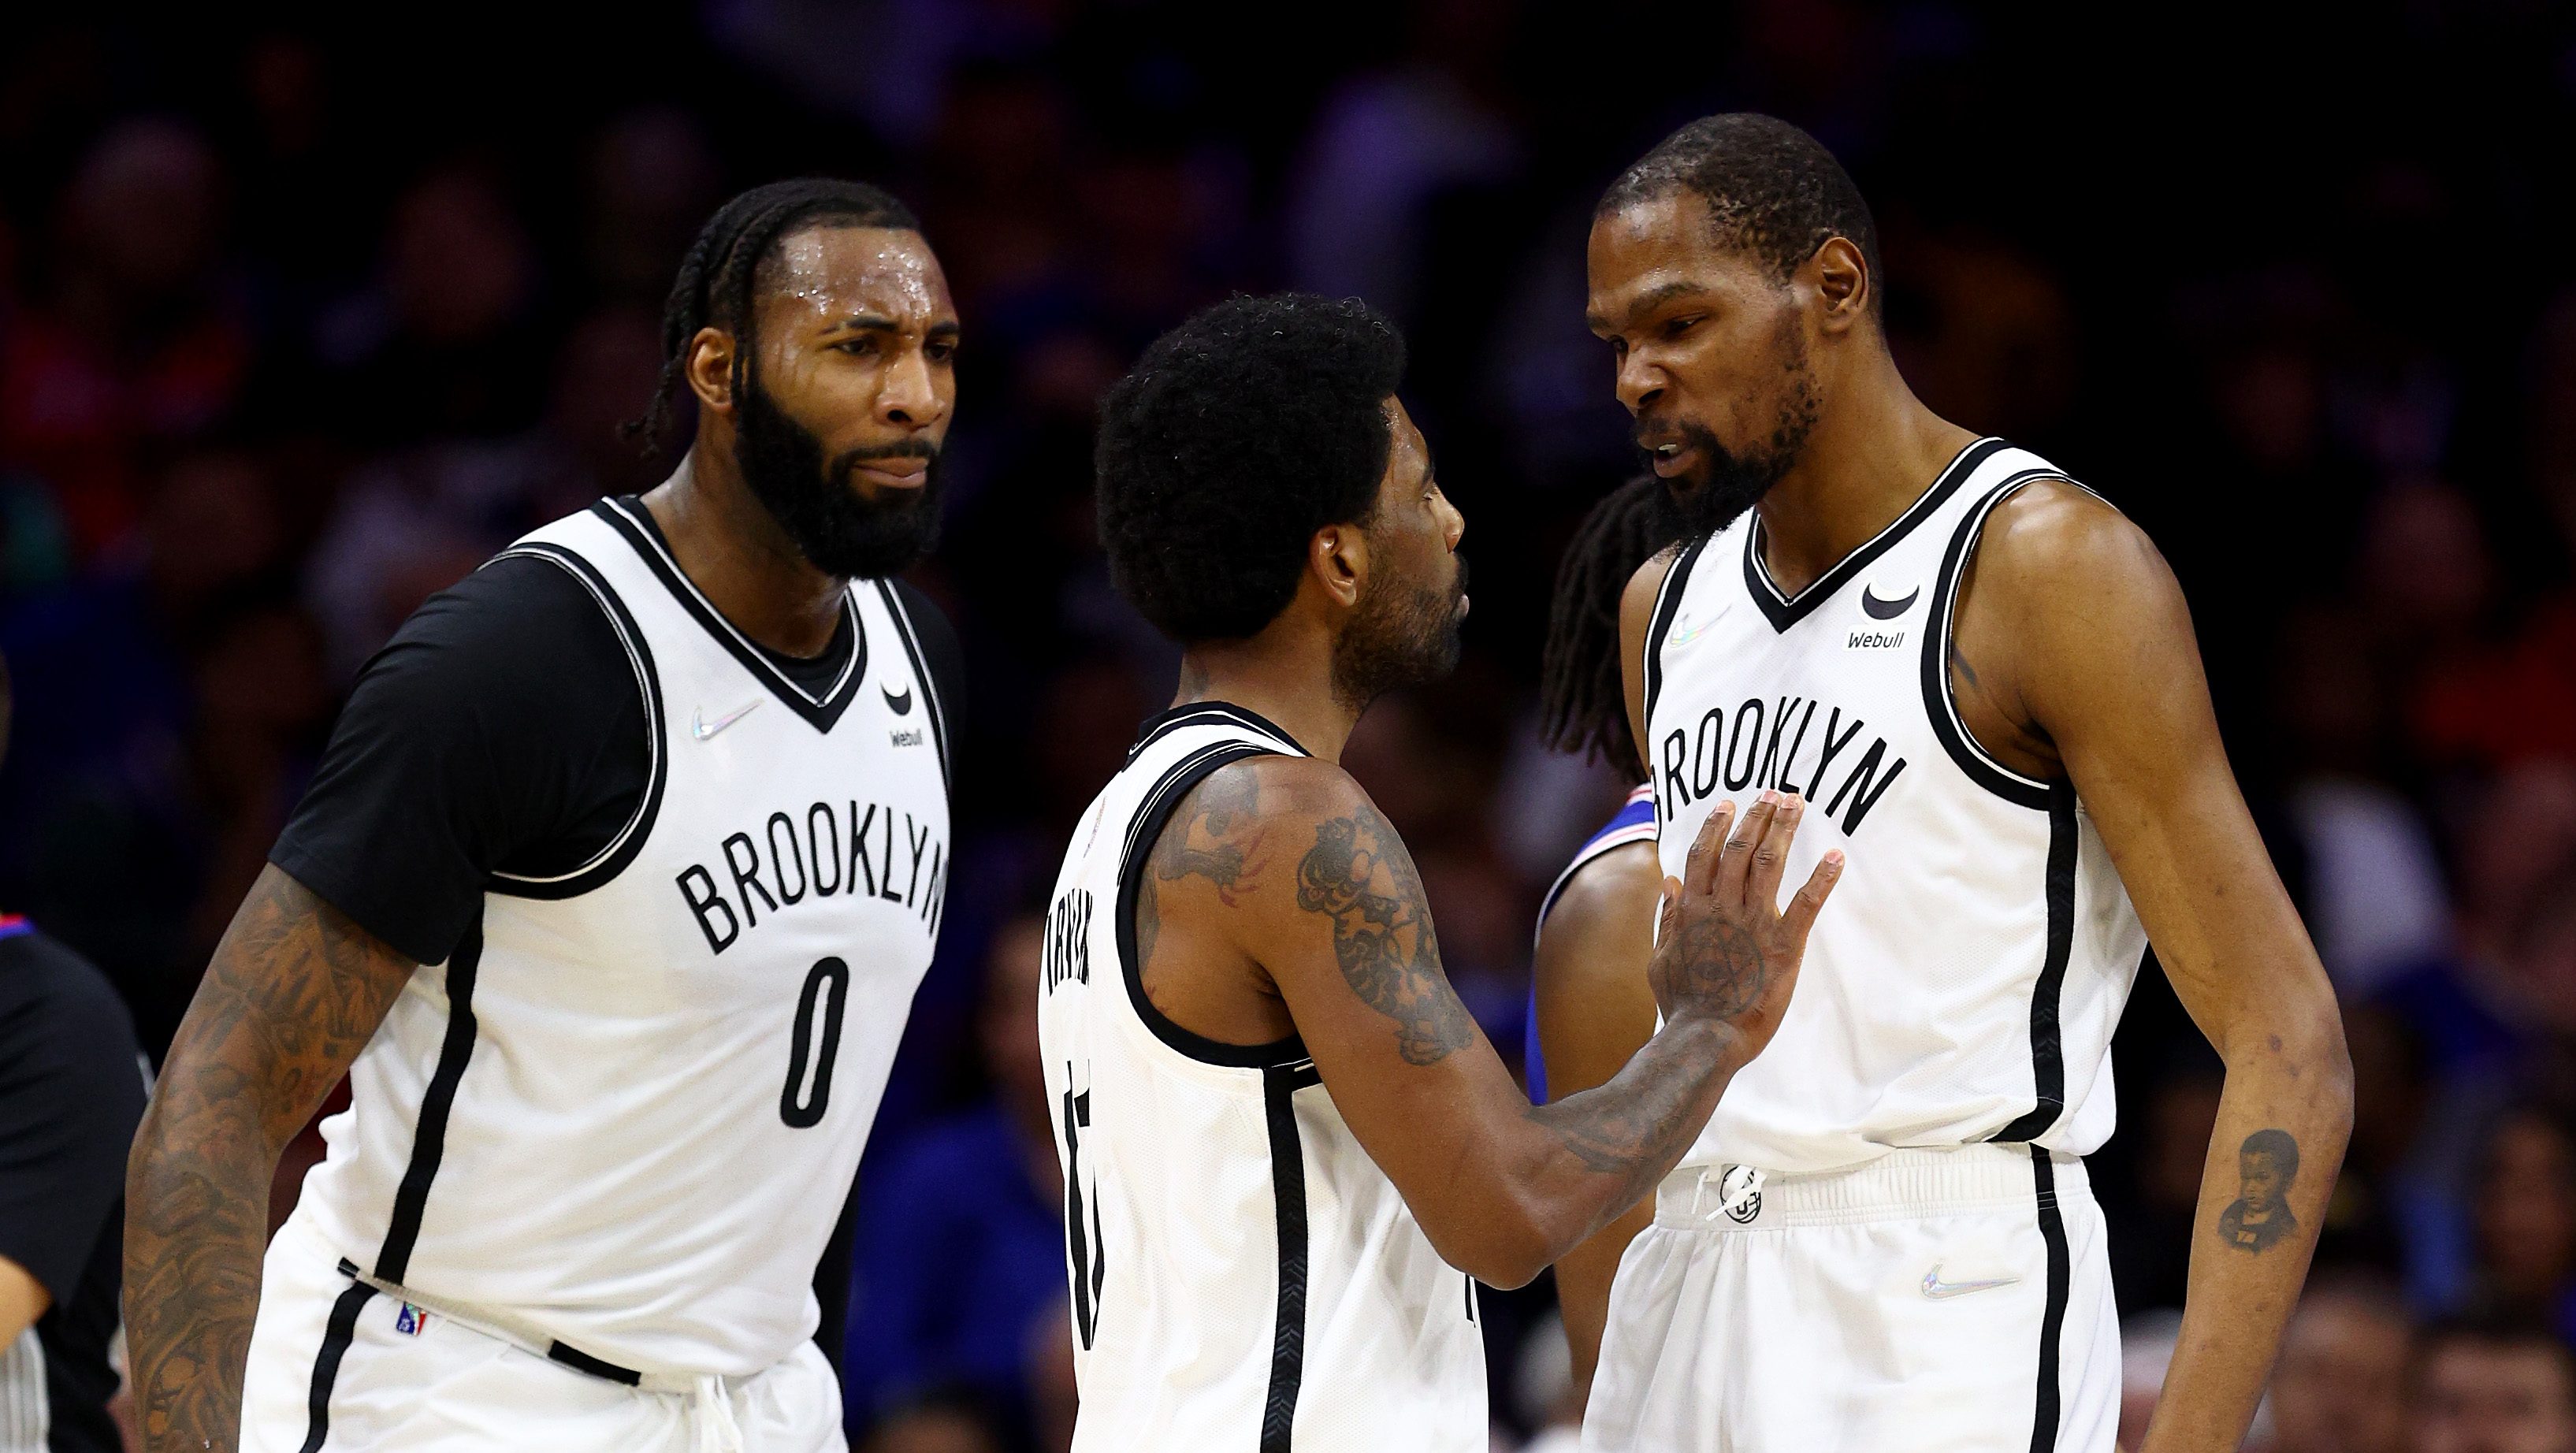 Andre Drummond leaves Nets, signs free agency deal with Chicago Bulls